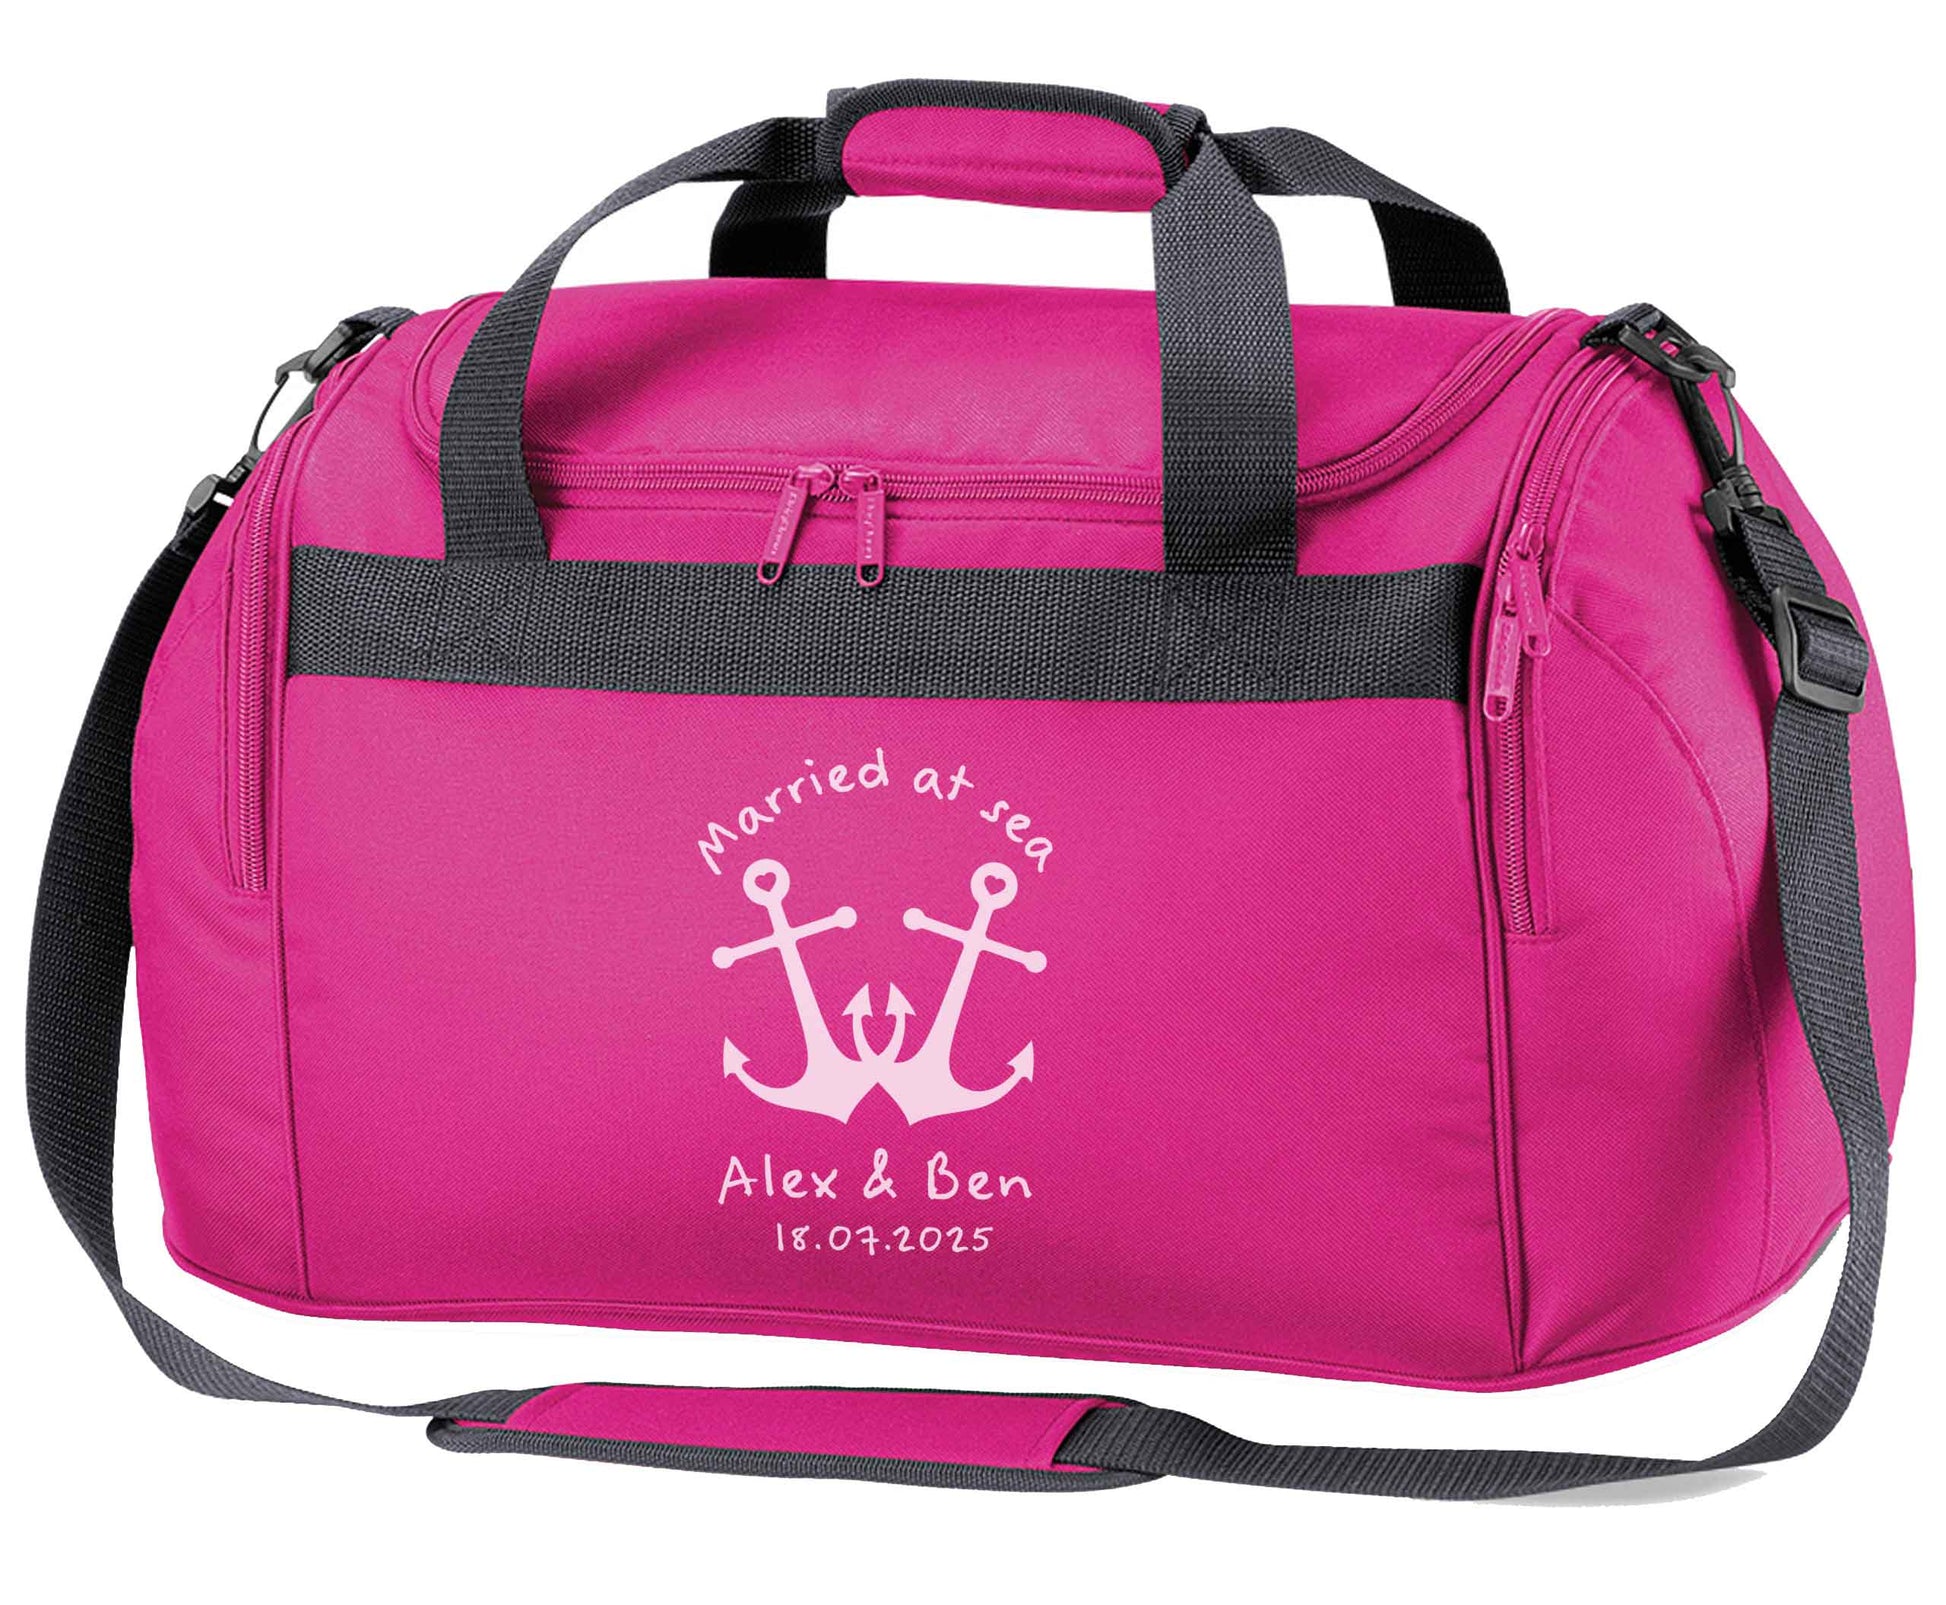 Married at sea blue anchors pink holdall / duffel bag